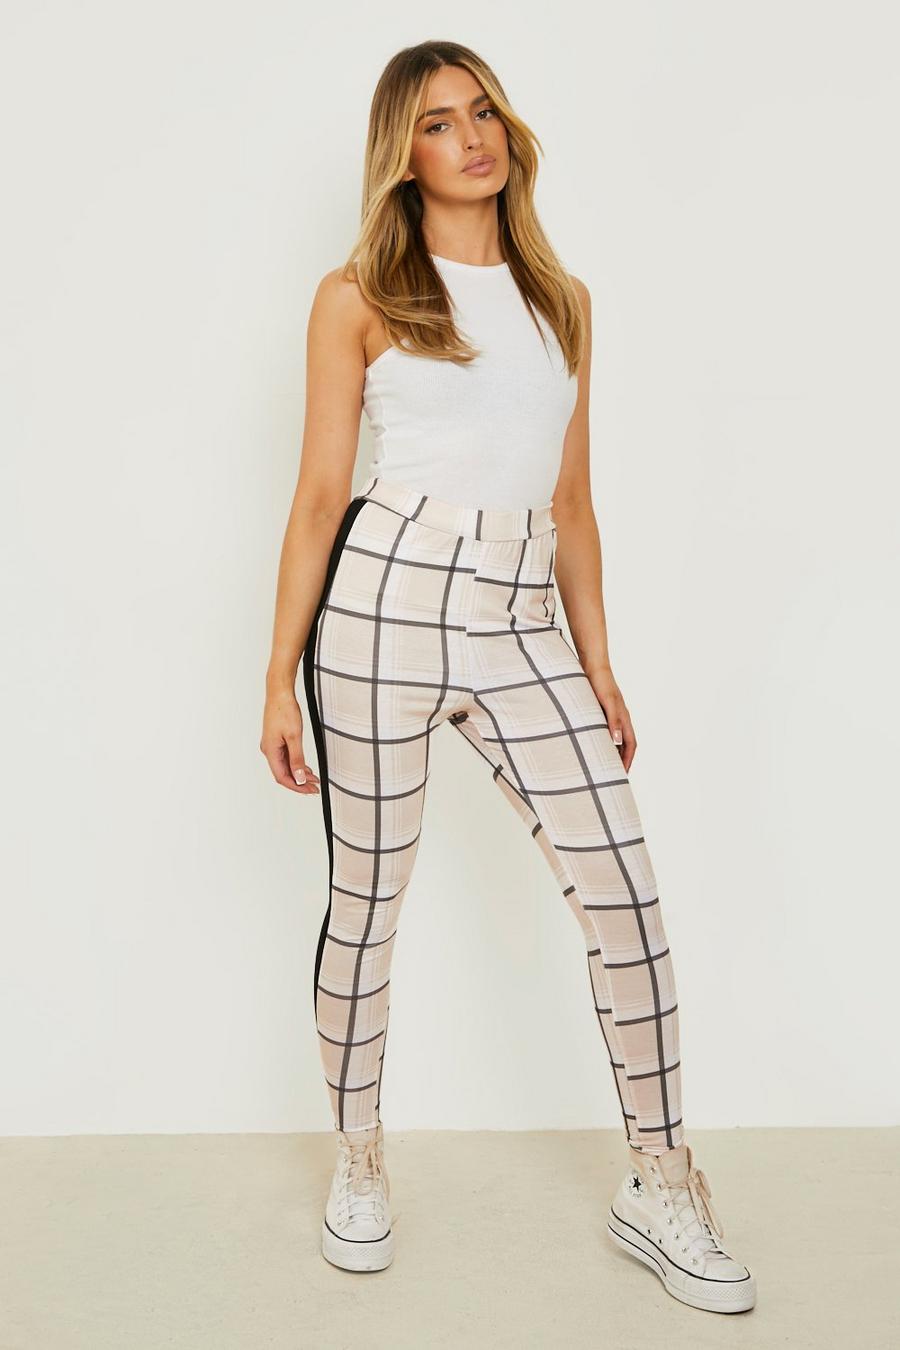 Stone beis Sports Stripe High Waisted Checked Leggings